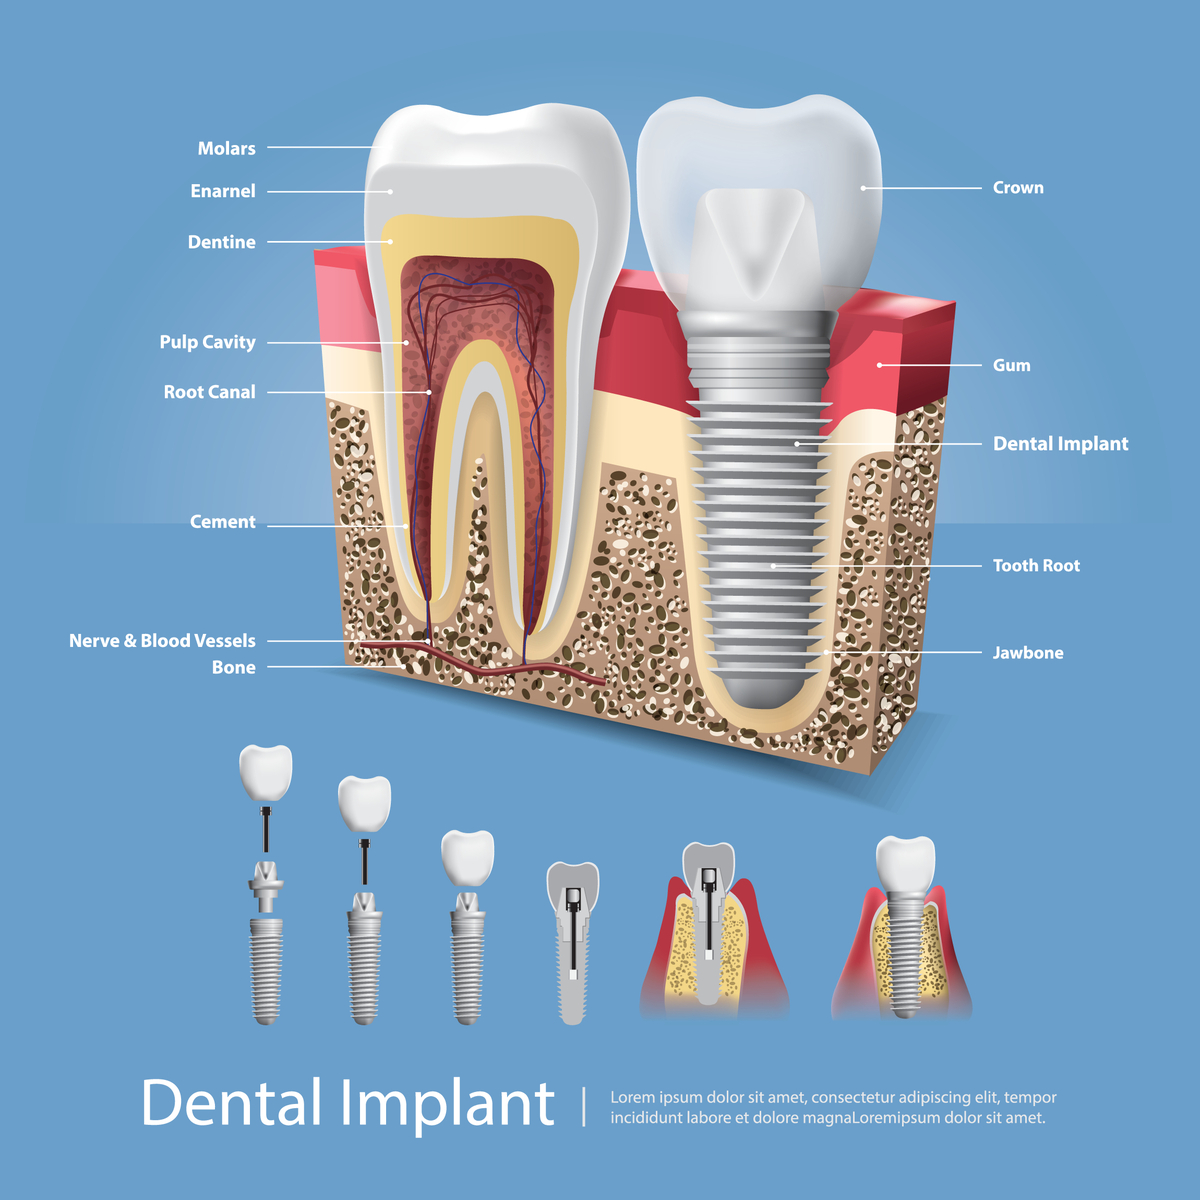 Dental Implant Sunset Hills, MO | Tooth Pain | Restorative Dentistry | Cosmetic Dentistry Near Sunset Hills, MO